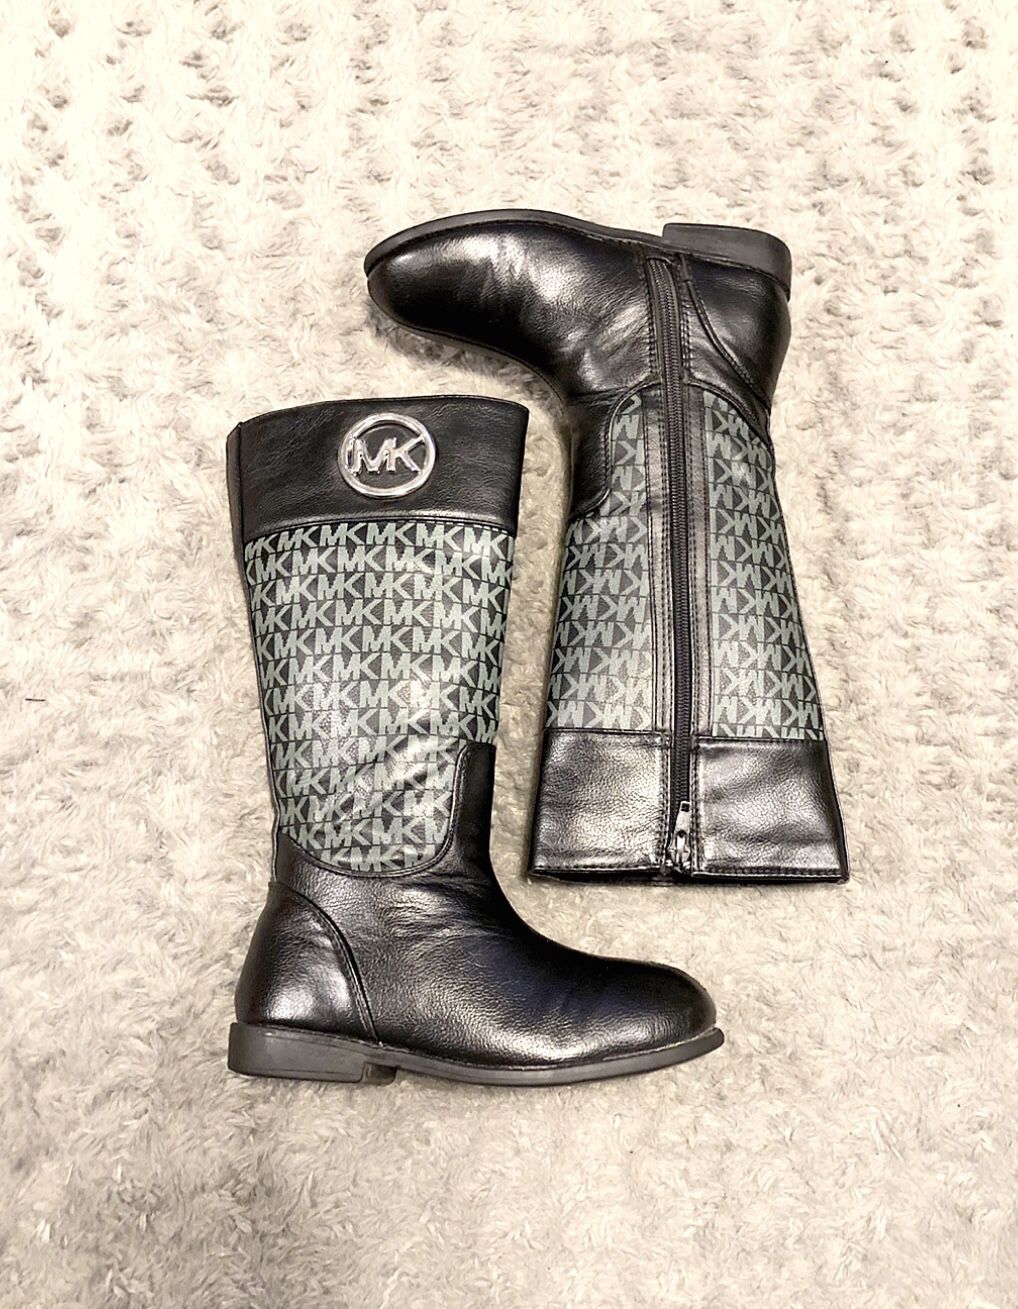 Girls Michael Kors Ridear boots paid $64 Size 13 Good condition! Black Gray Logo Boots Girls 2 Beautiful pair of boots. Light wear in front overall g